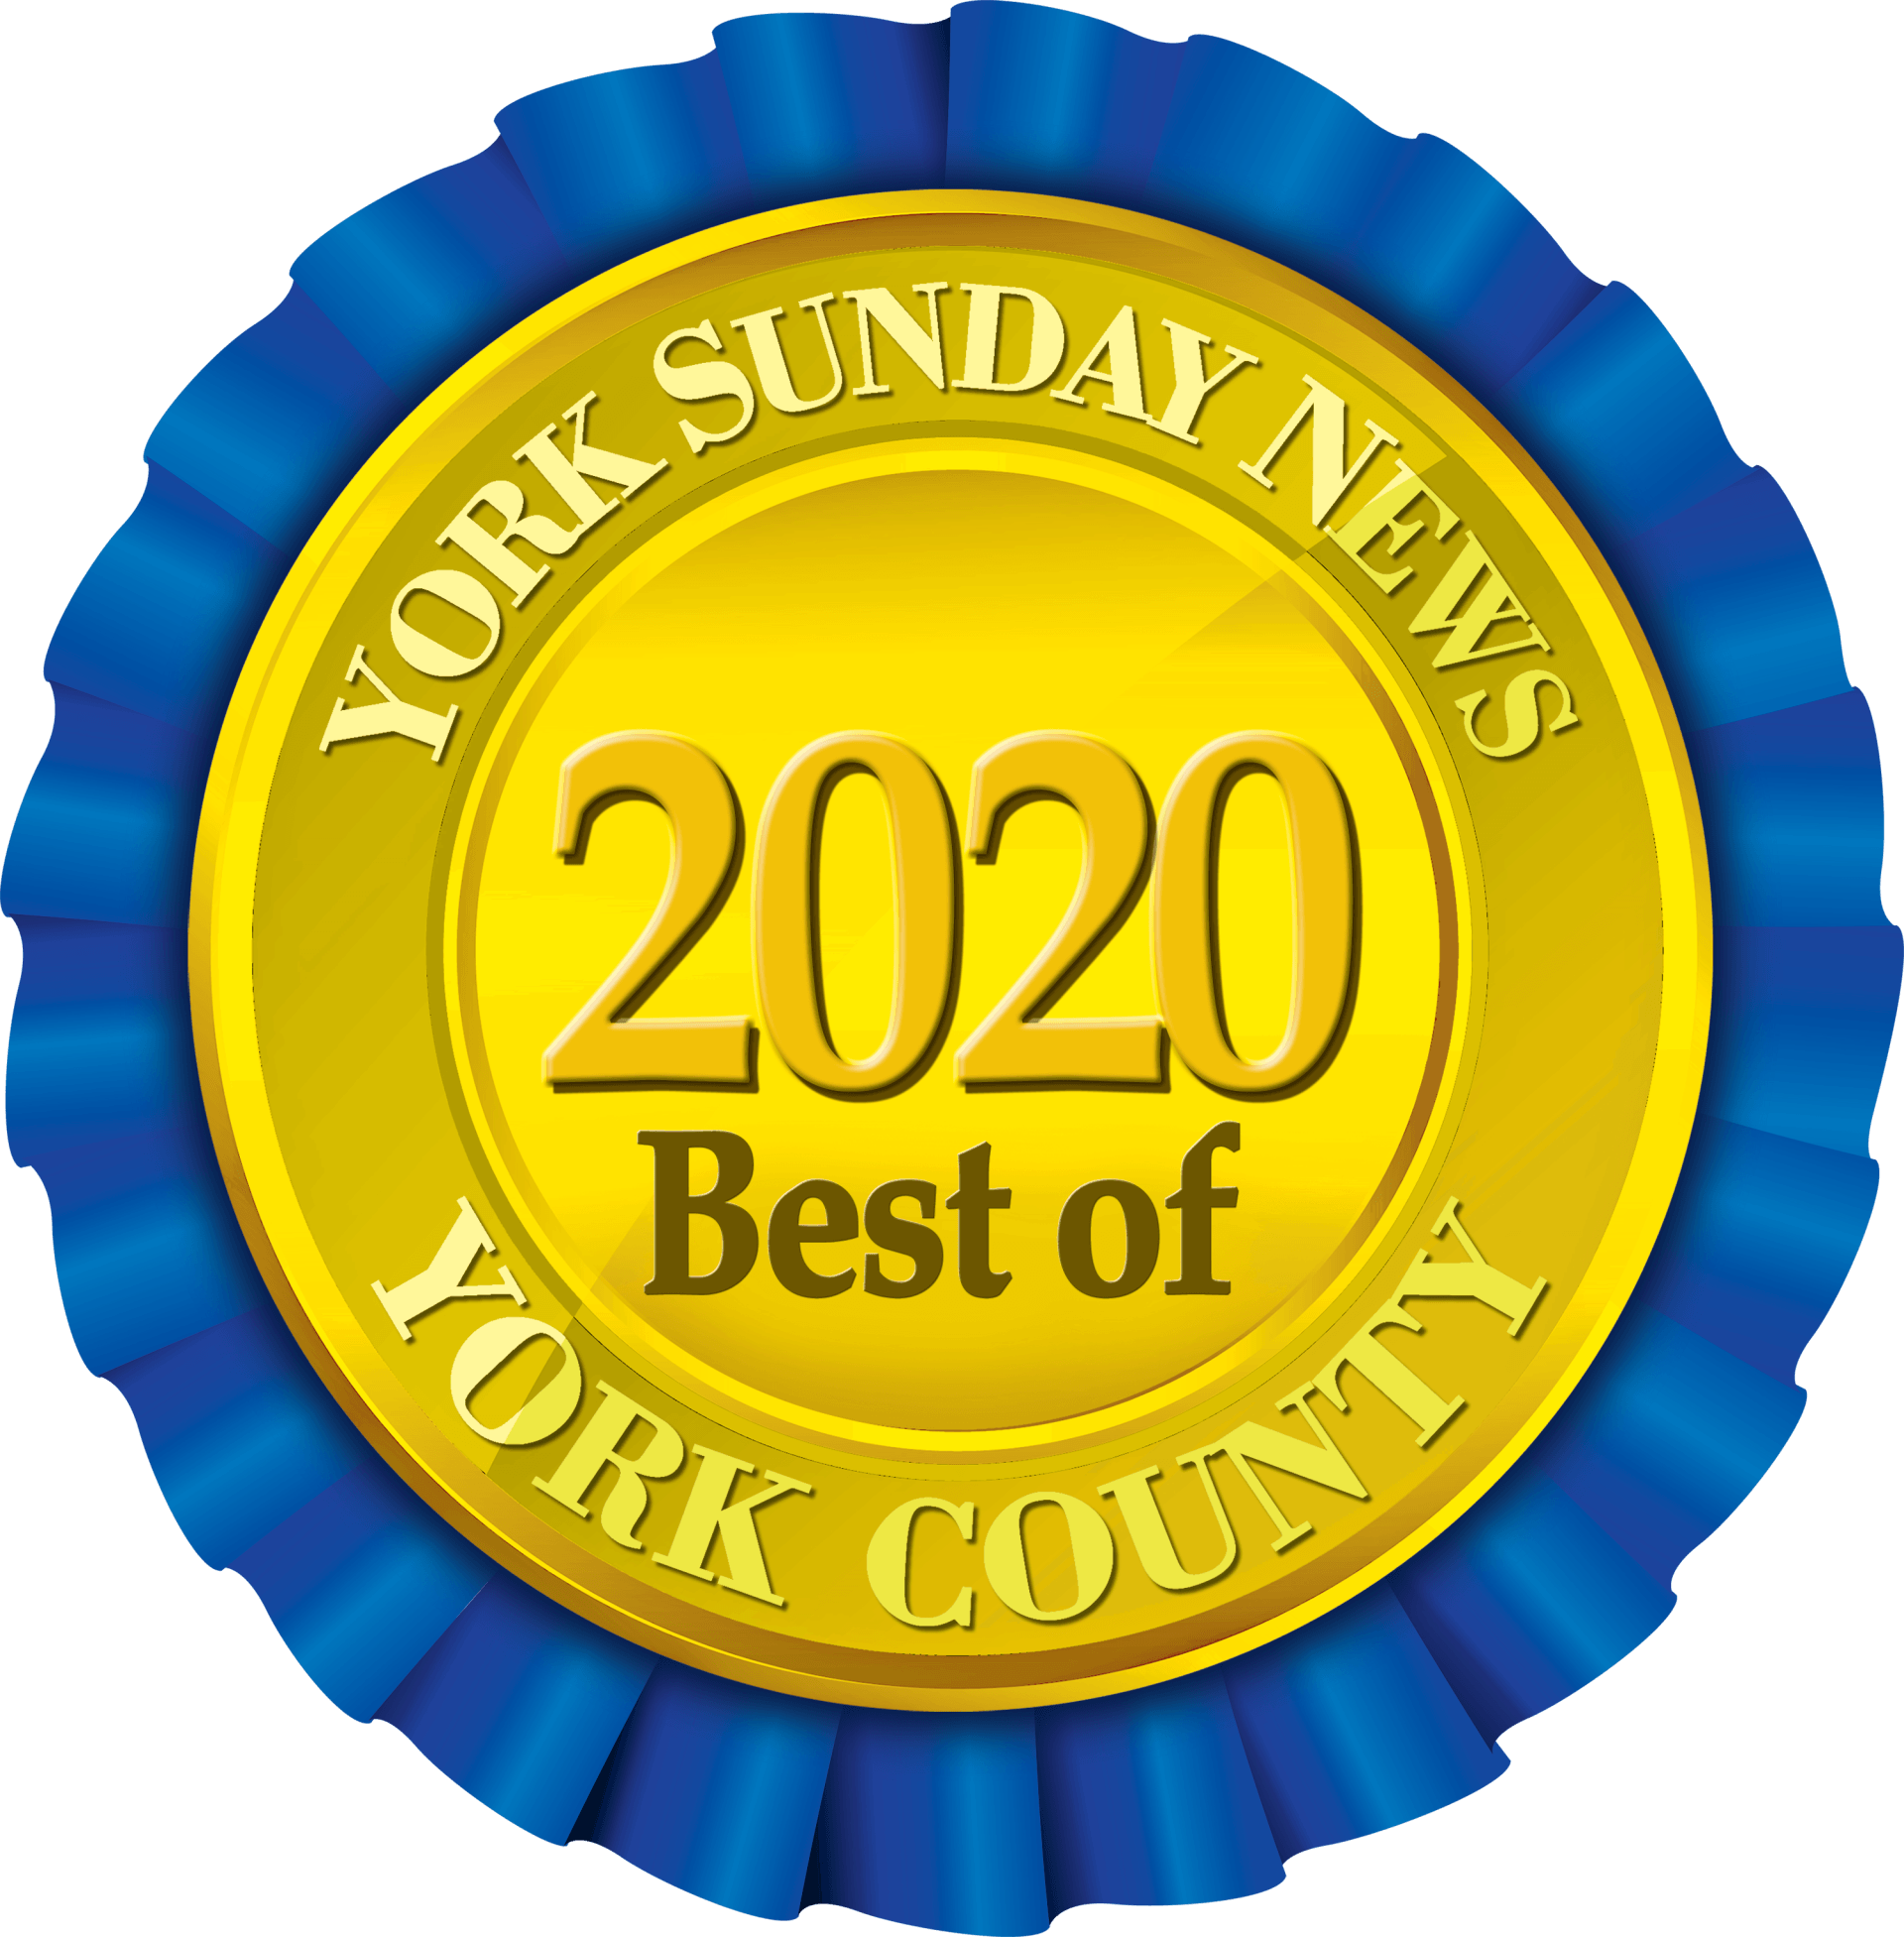 2020 Best of York Country